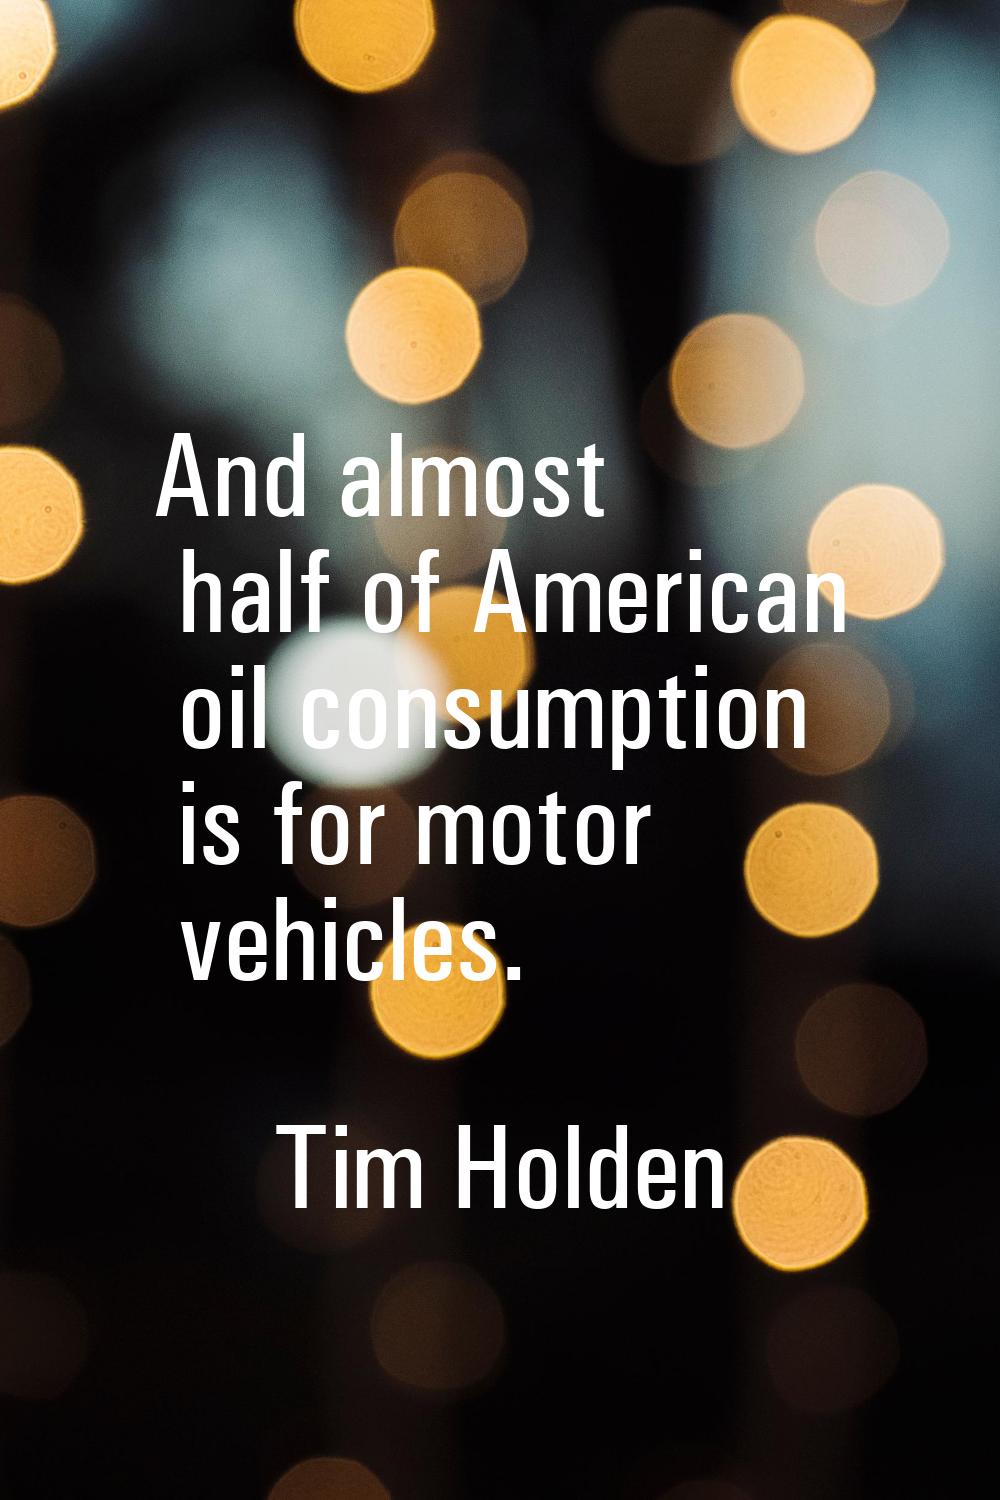 And almost half of American oil consumption is for motor vehicles.